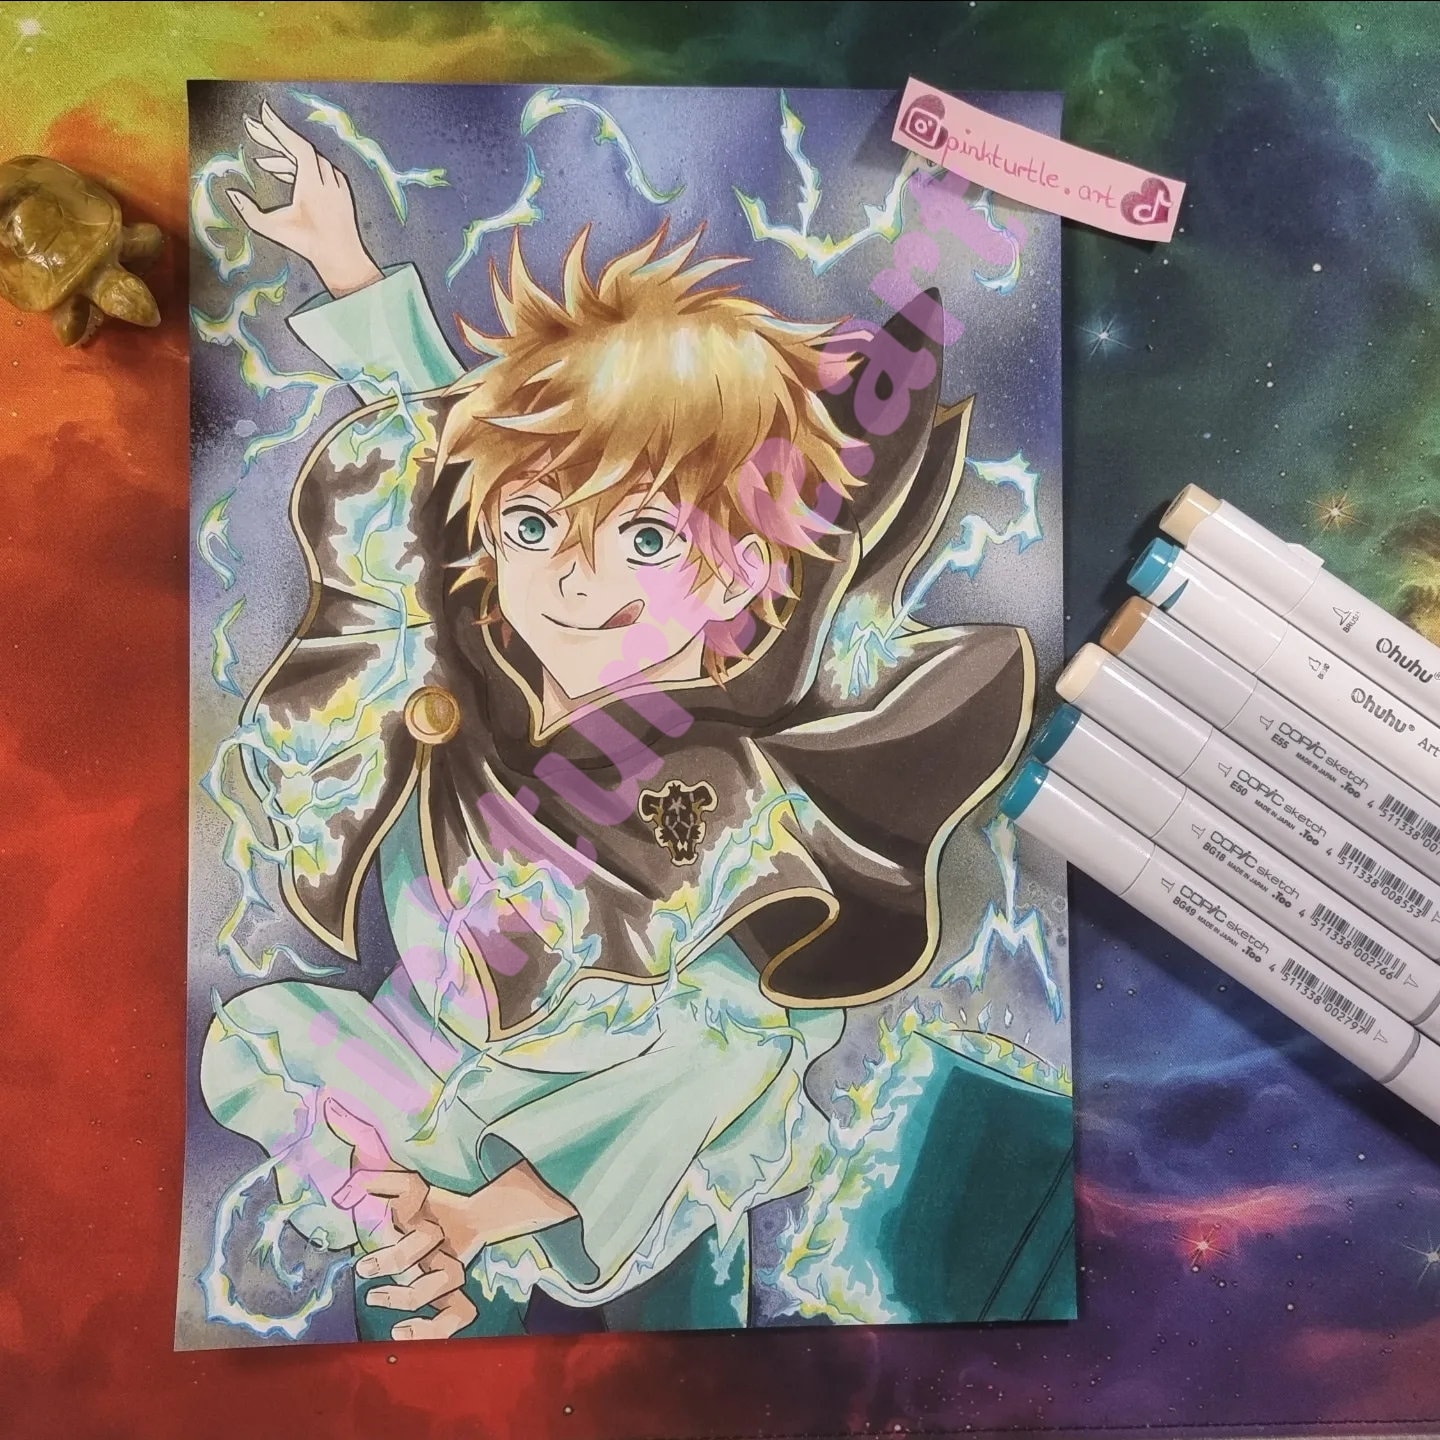 Comic Nero Anime Art Supplies For Teens: Create Your Own Comics with A  Creative Blank Comic Book - 50 Unique Guided Templates to Fill-in